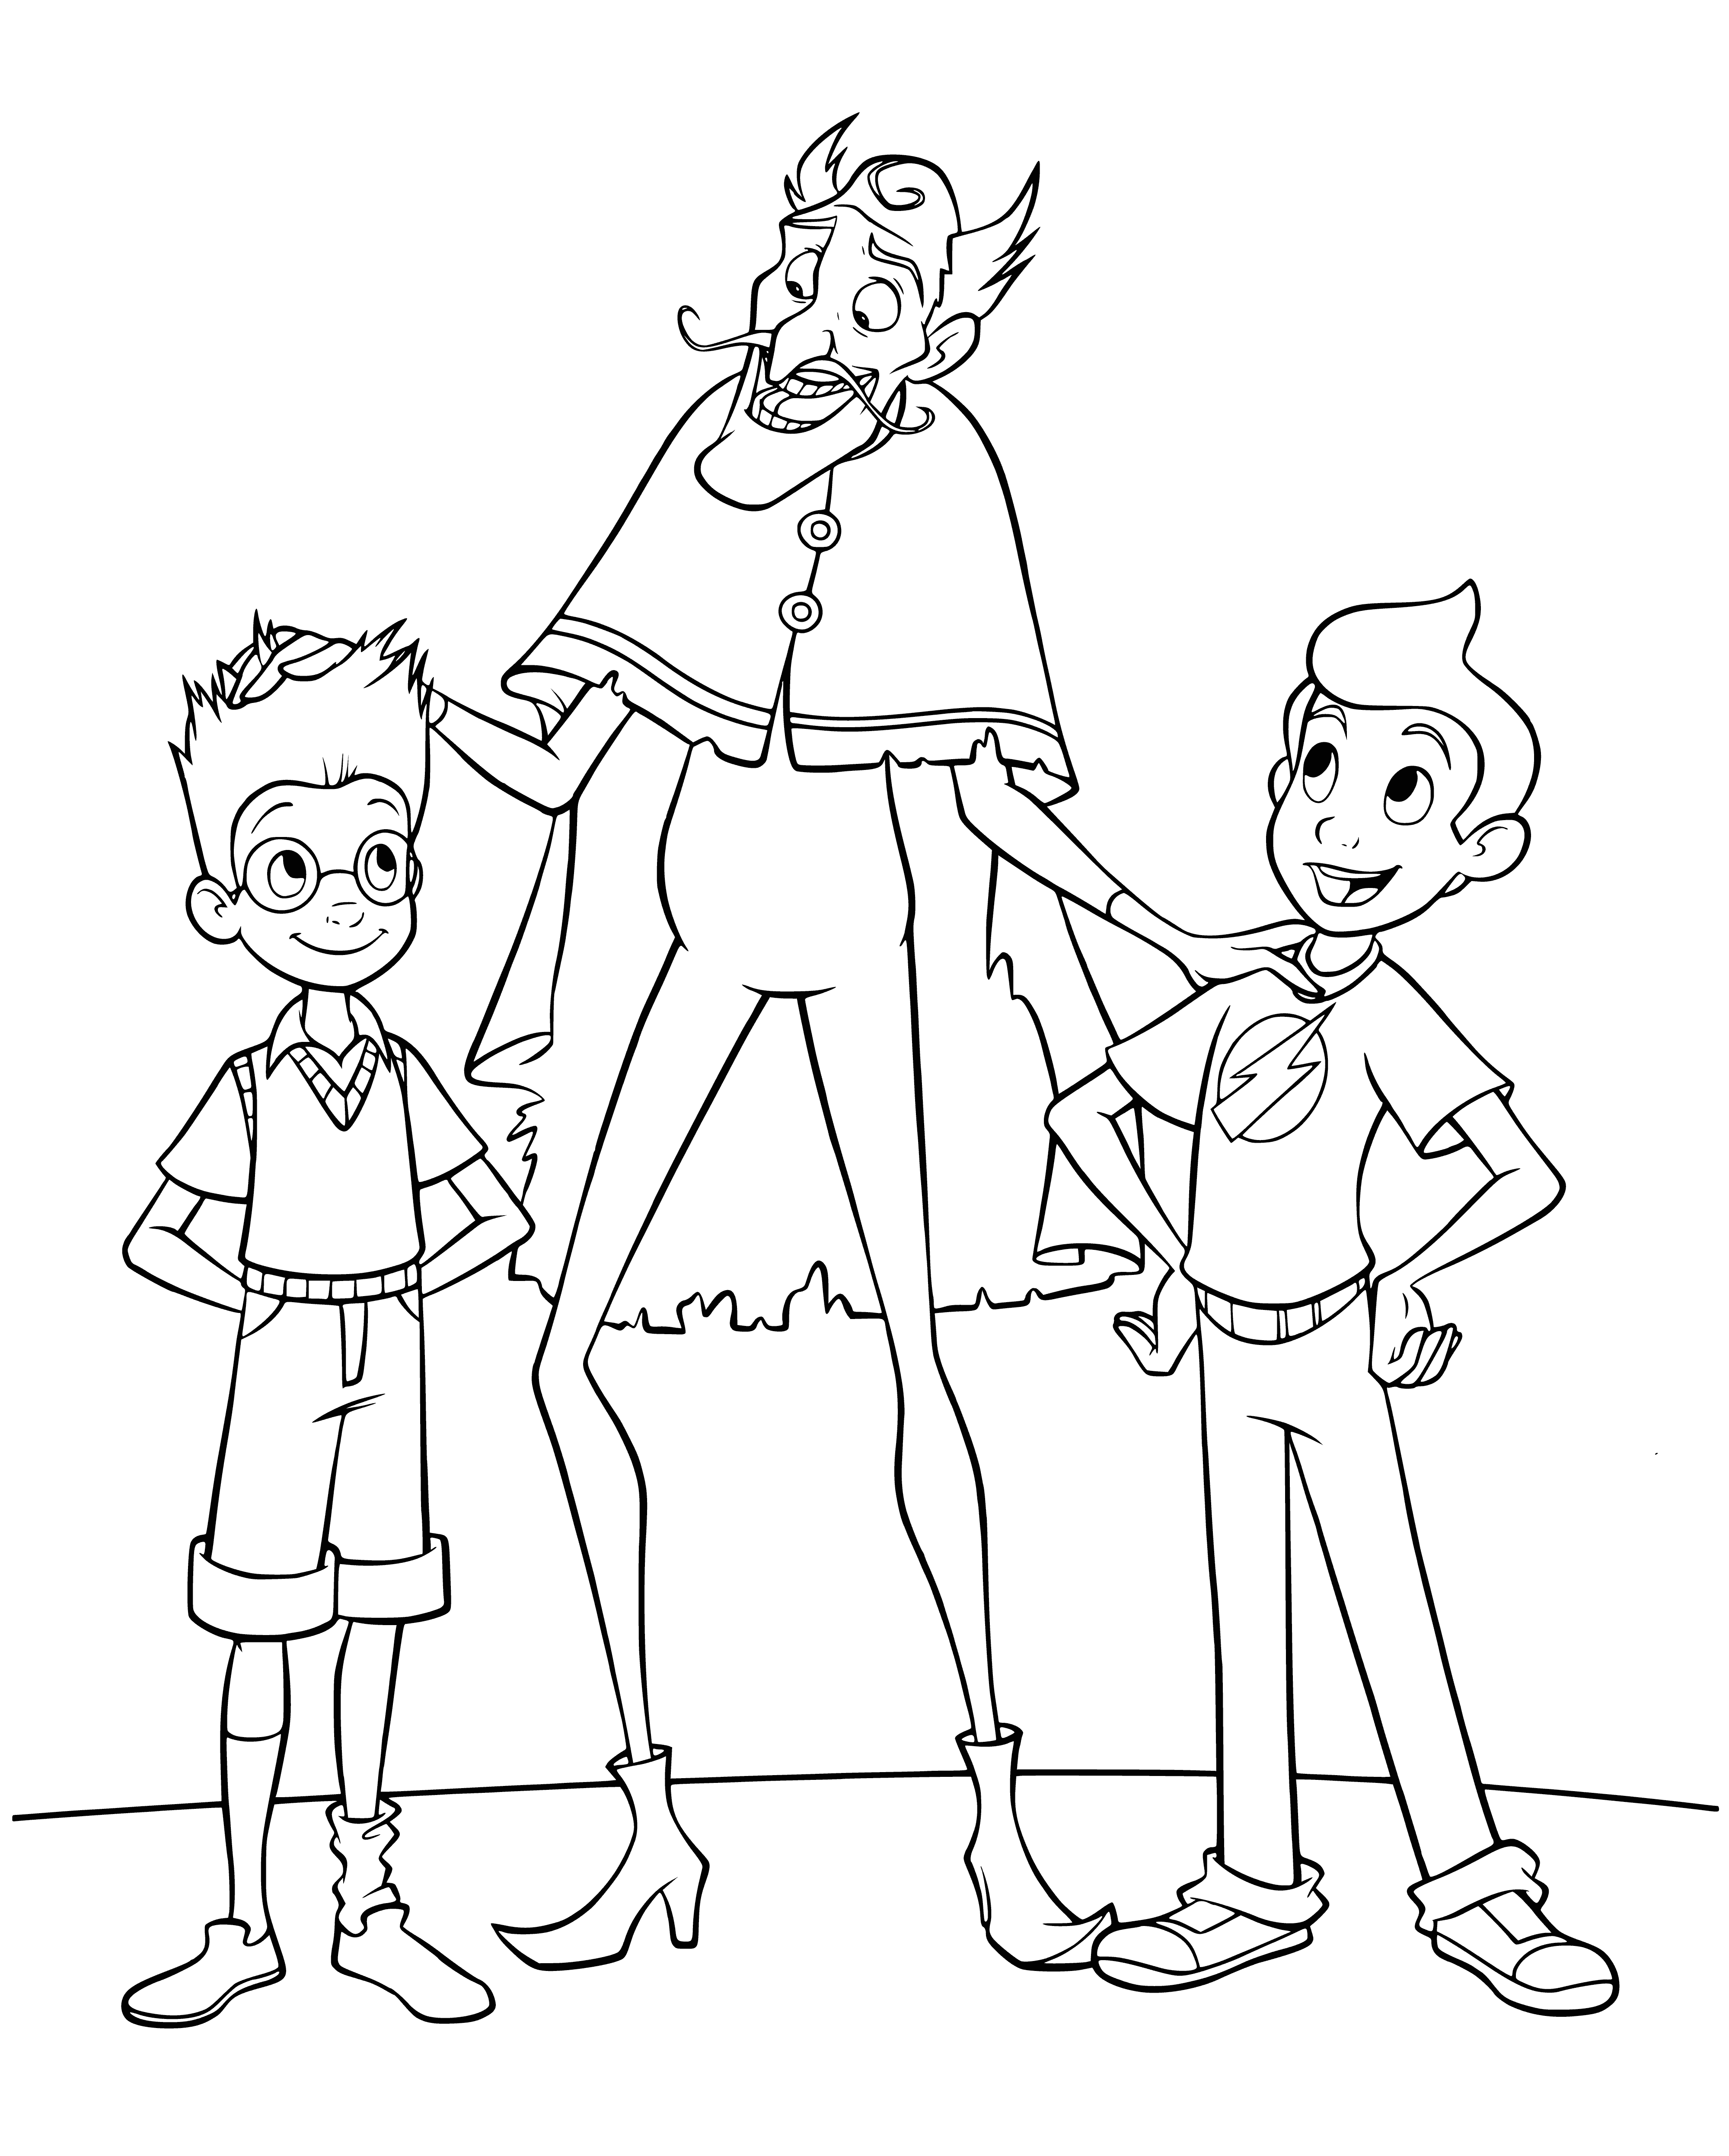 coloring page: Boy with red hair looks up to a big blue & white robot with red eyes, 2 small figures in left corner. Boy with arms outstretched.